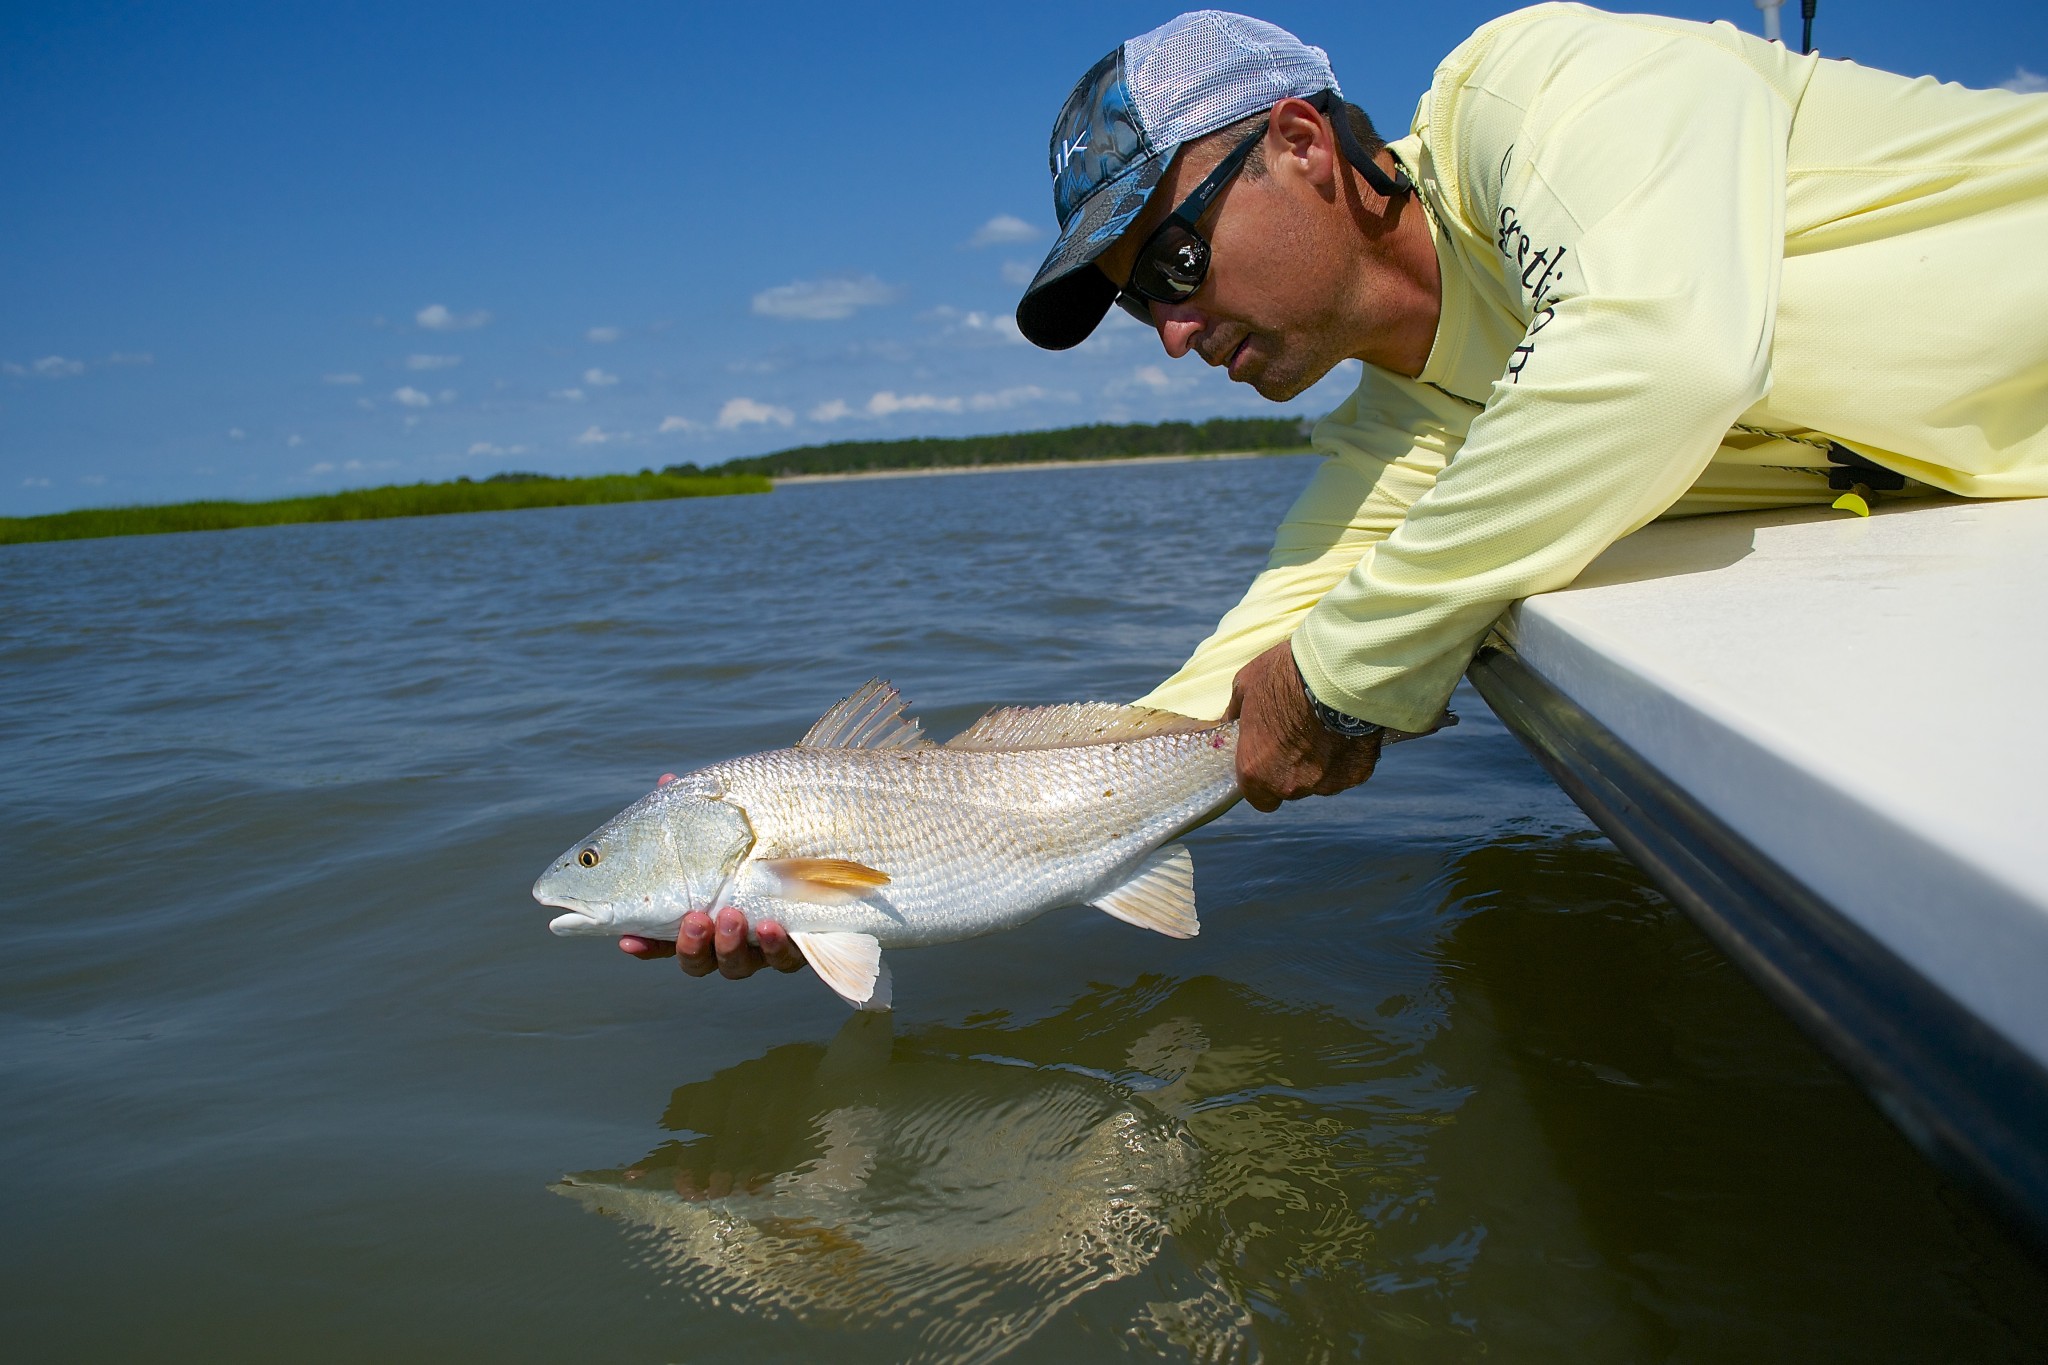 Angler releasing redfish back into the water